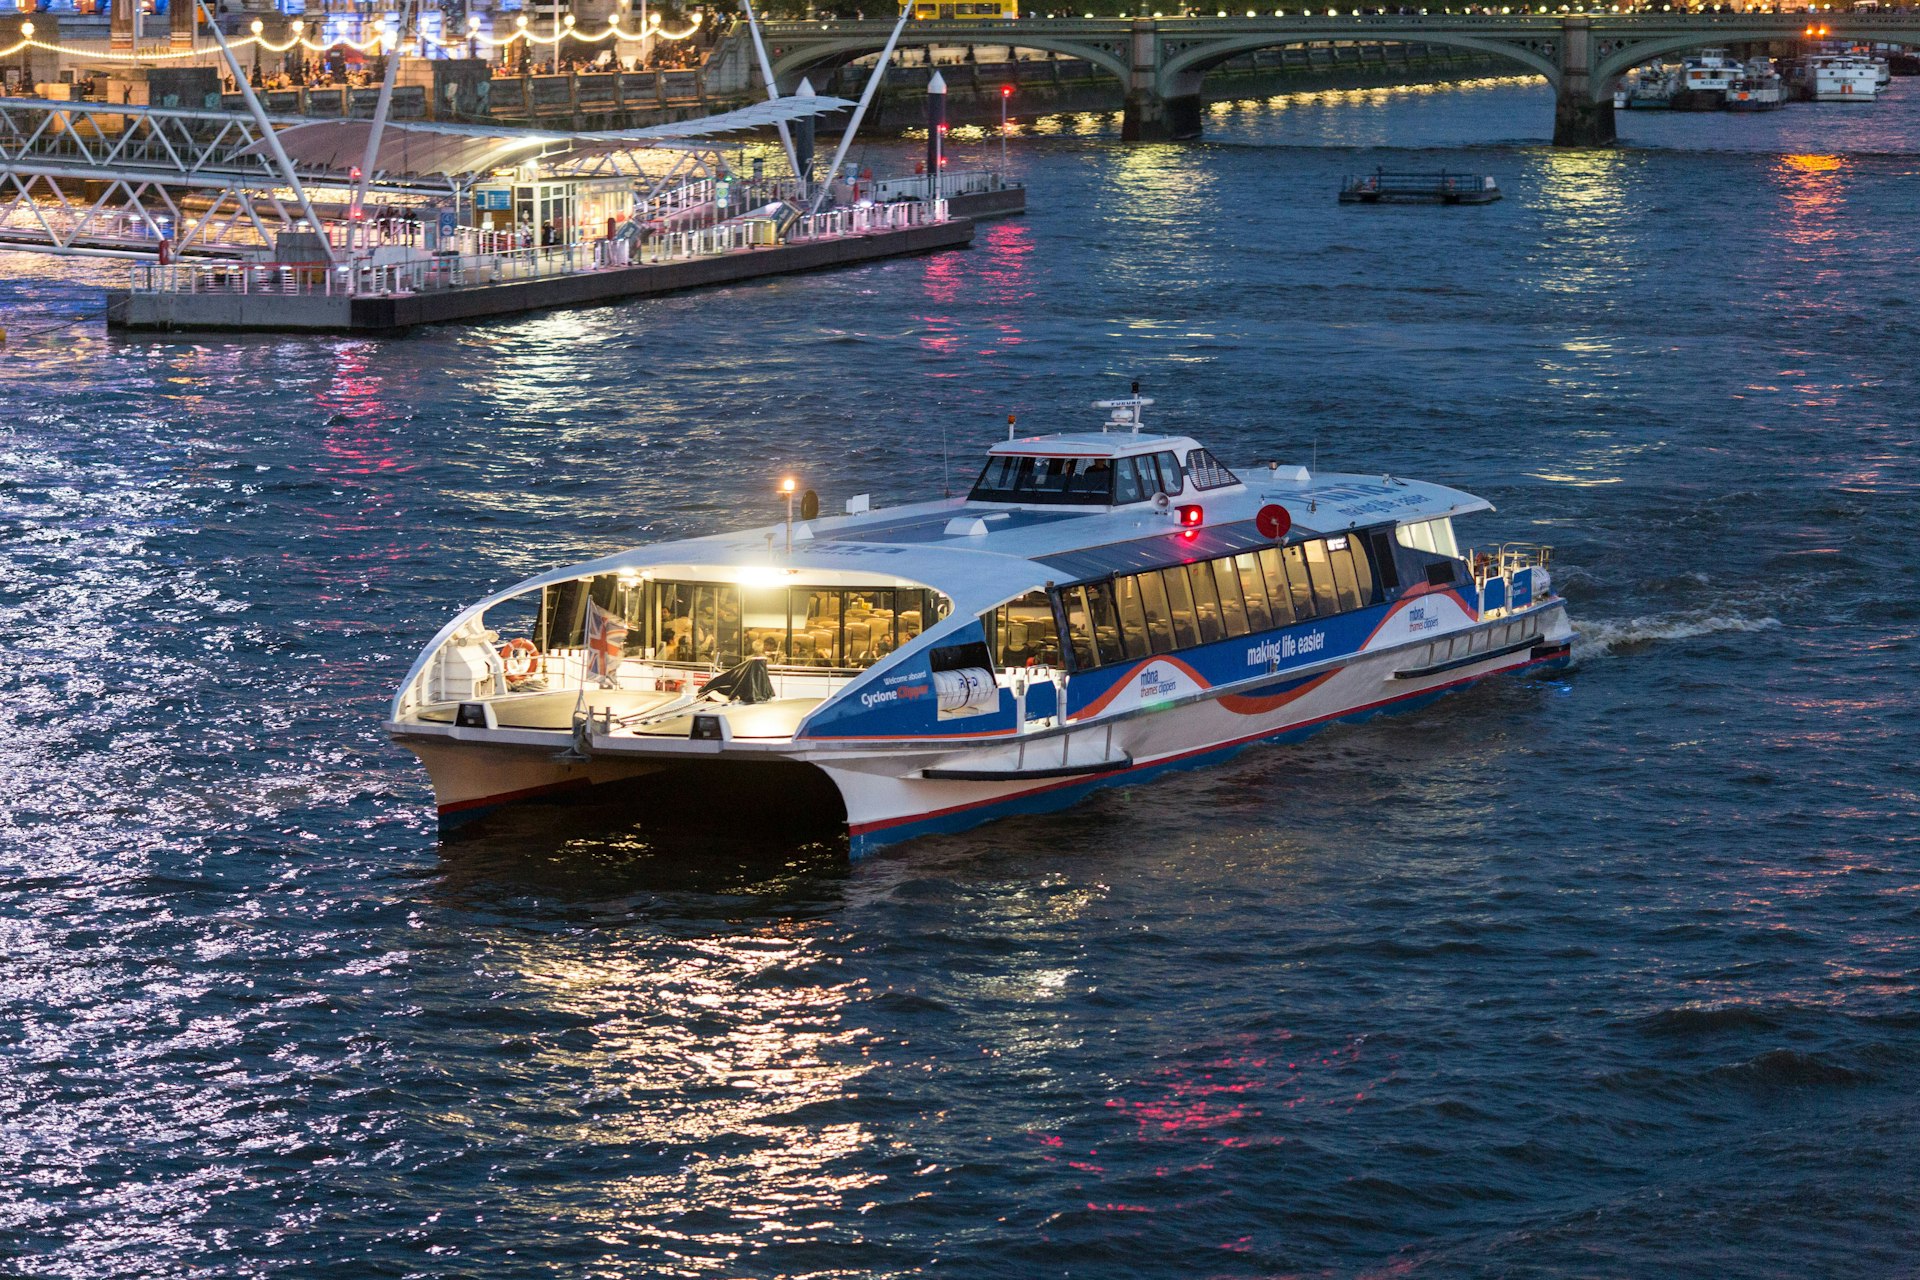 MBNA Thames Clippers departing The London Eye Waterloo Pier at night.